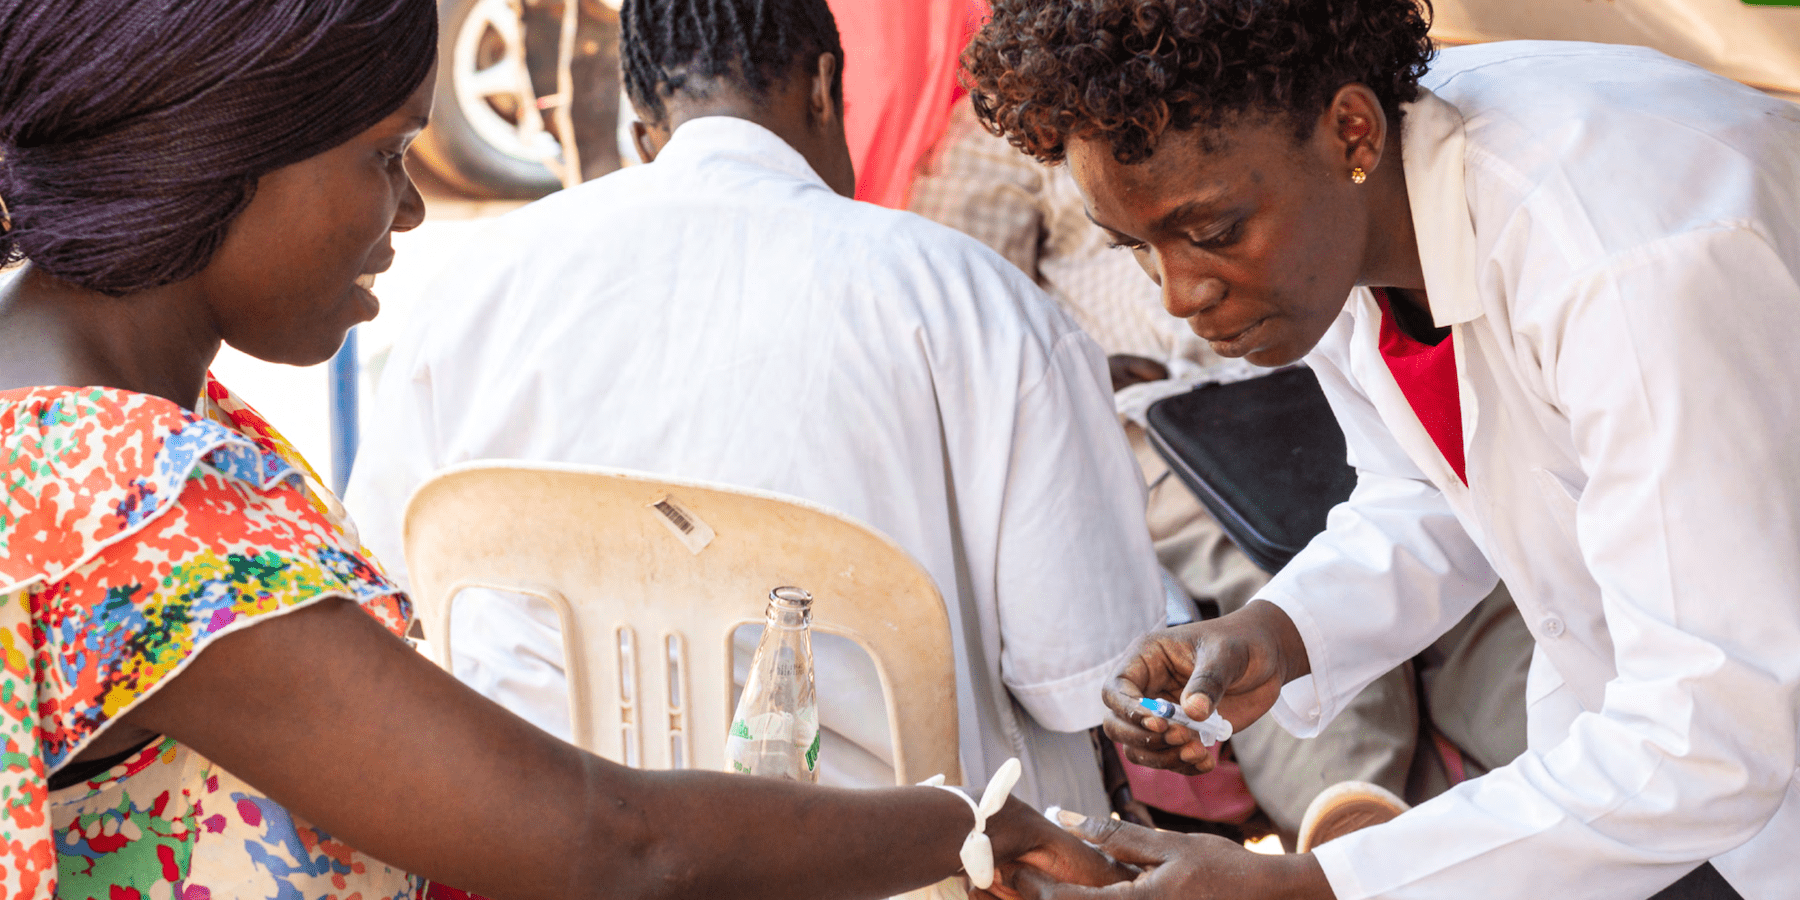 A woman donates blood at a blood donation street point in Kampala, Uganda.